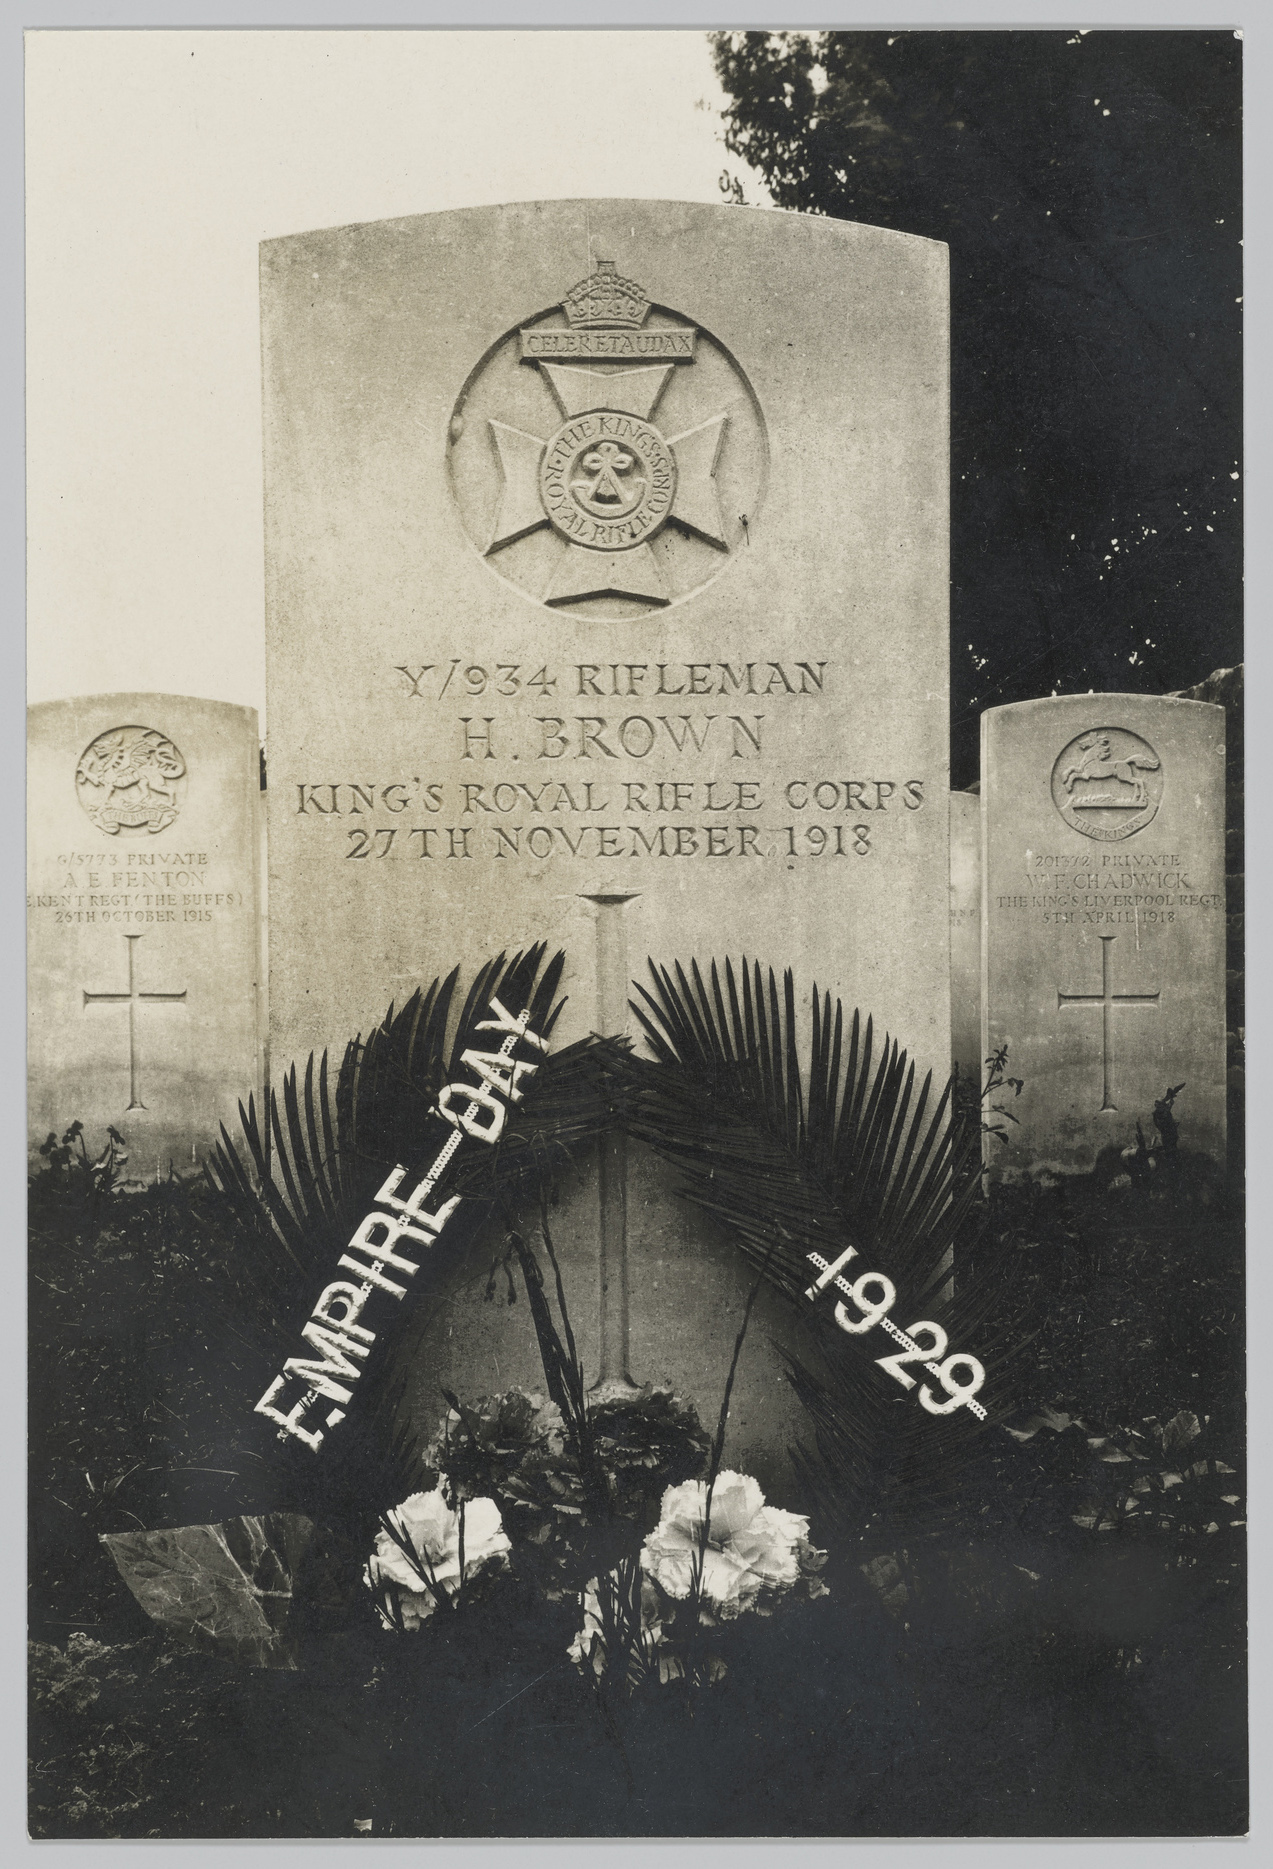 A black and white photograph of Harry Brown's grave with the insignia of his regiment engraved into the grave stone and flowers placed infront. 